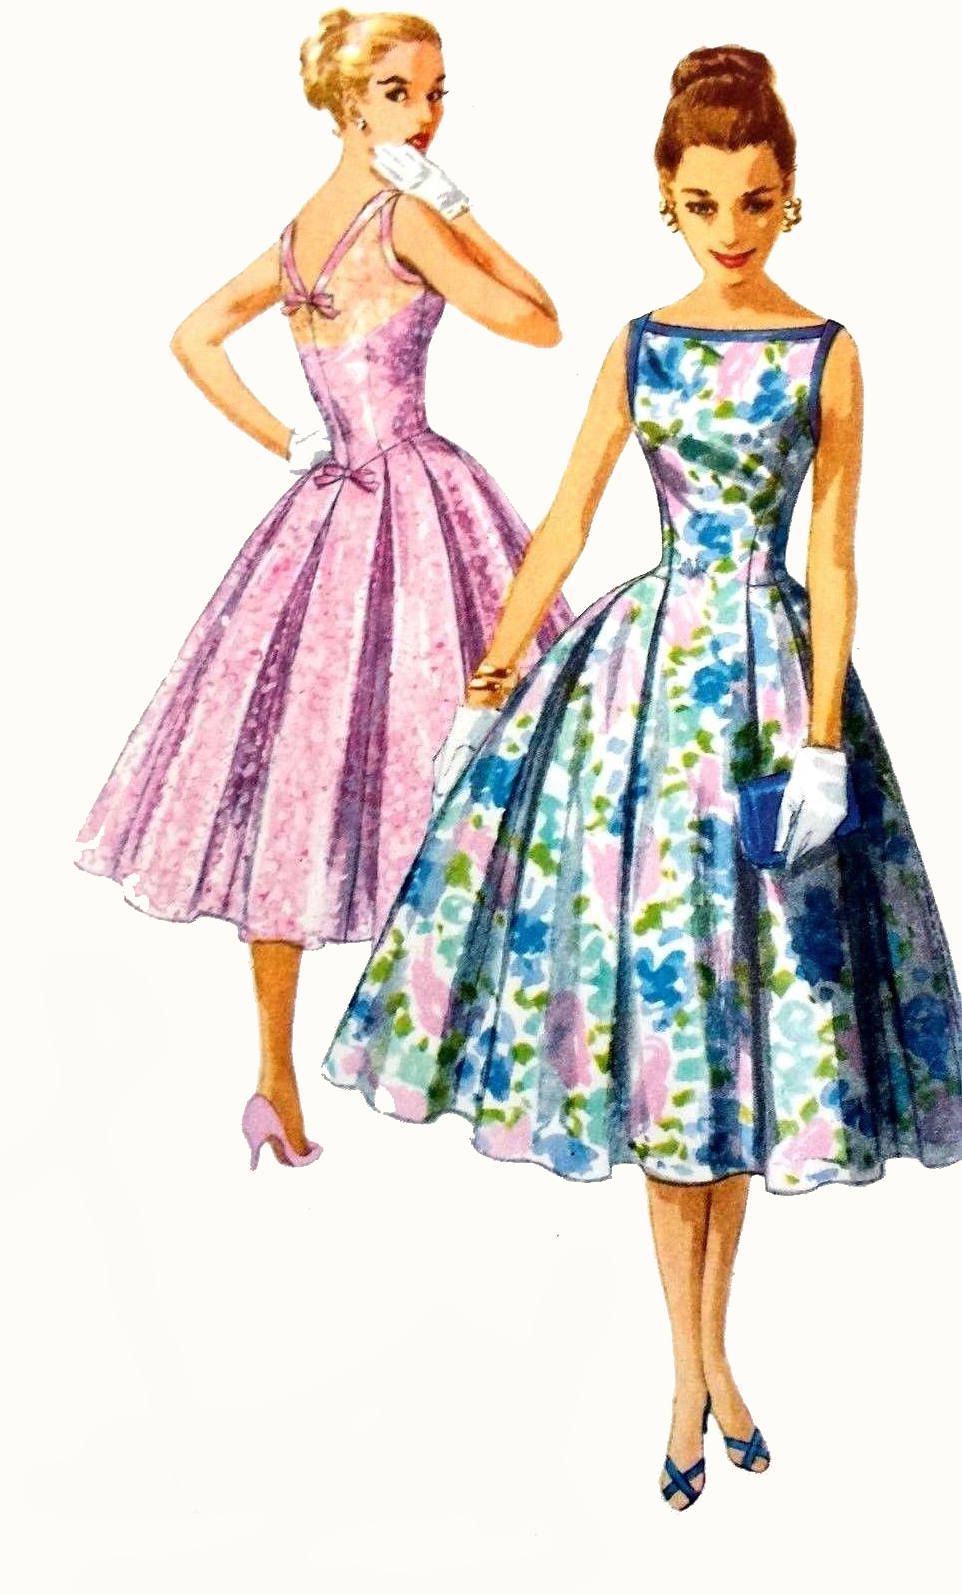 Vintage 1950s Sewing Pattern, Low 'V' Back, Prom, Ballgown, Wedding, Party Dress, Bust 34